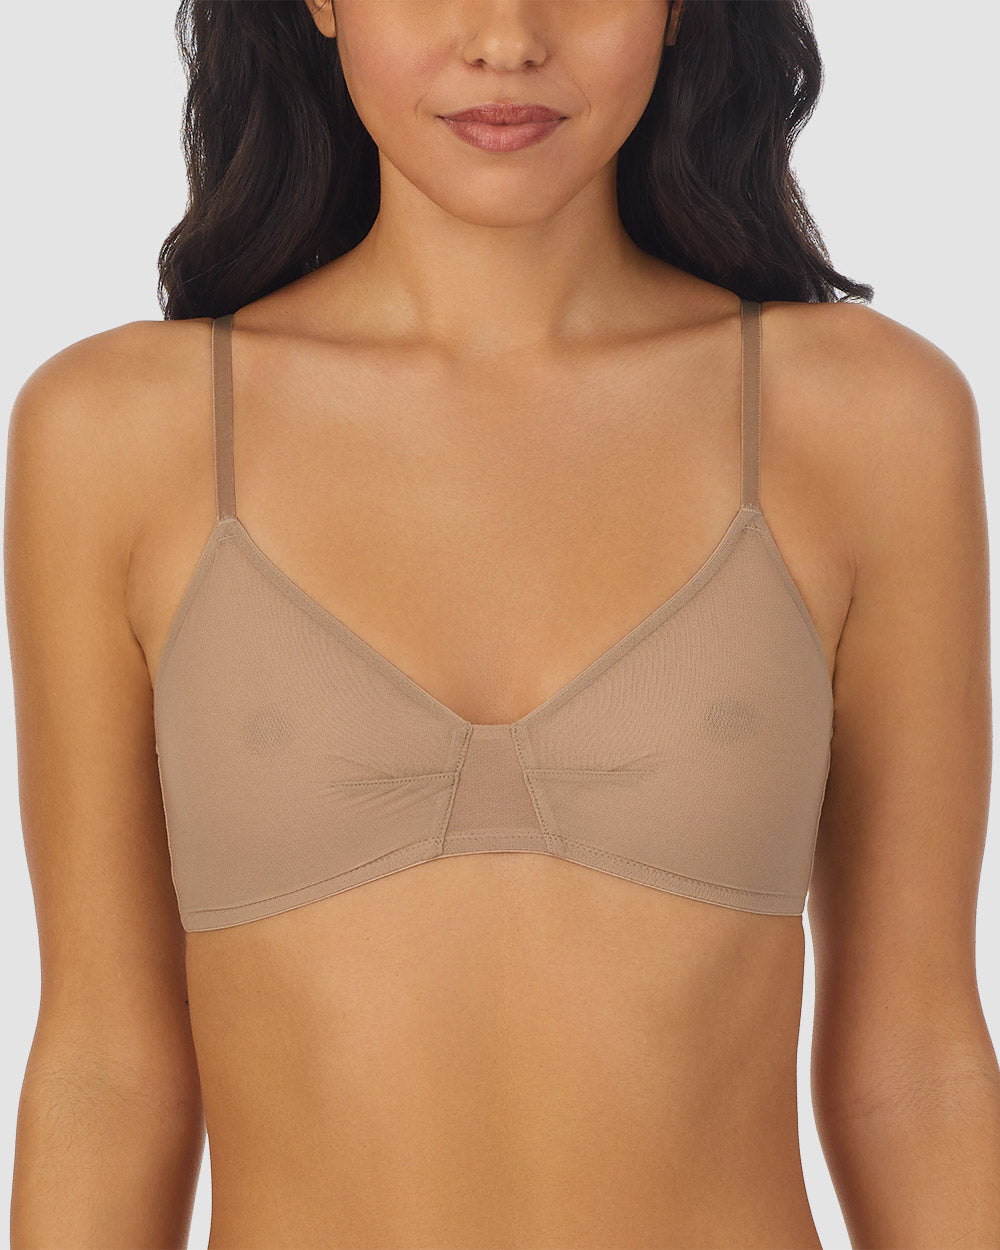 A lady wearing mocha next to nothing bralette.